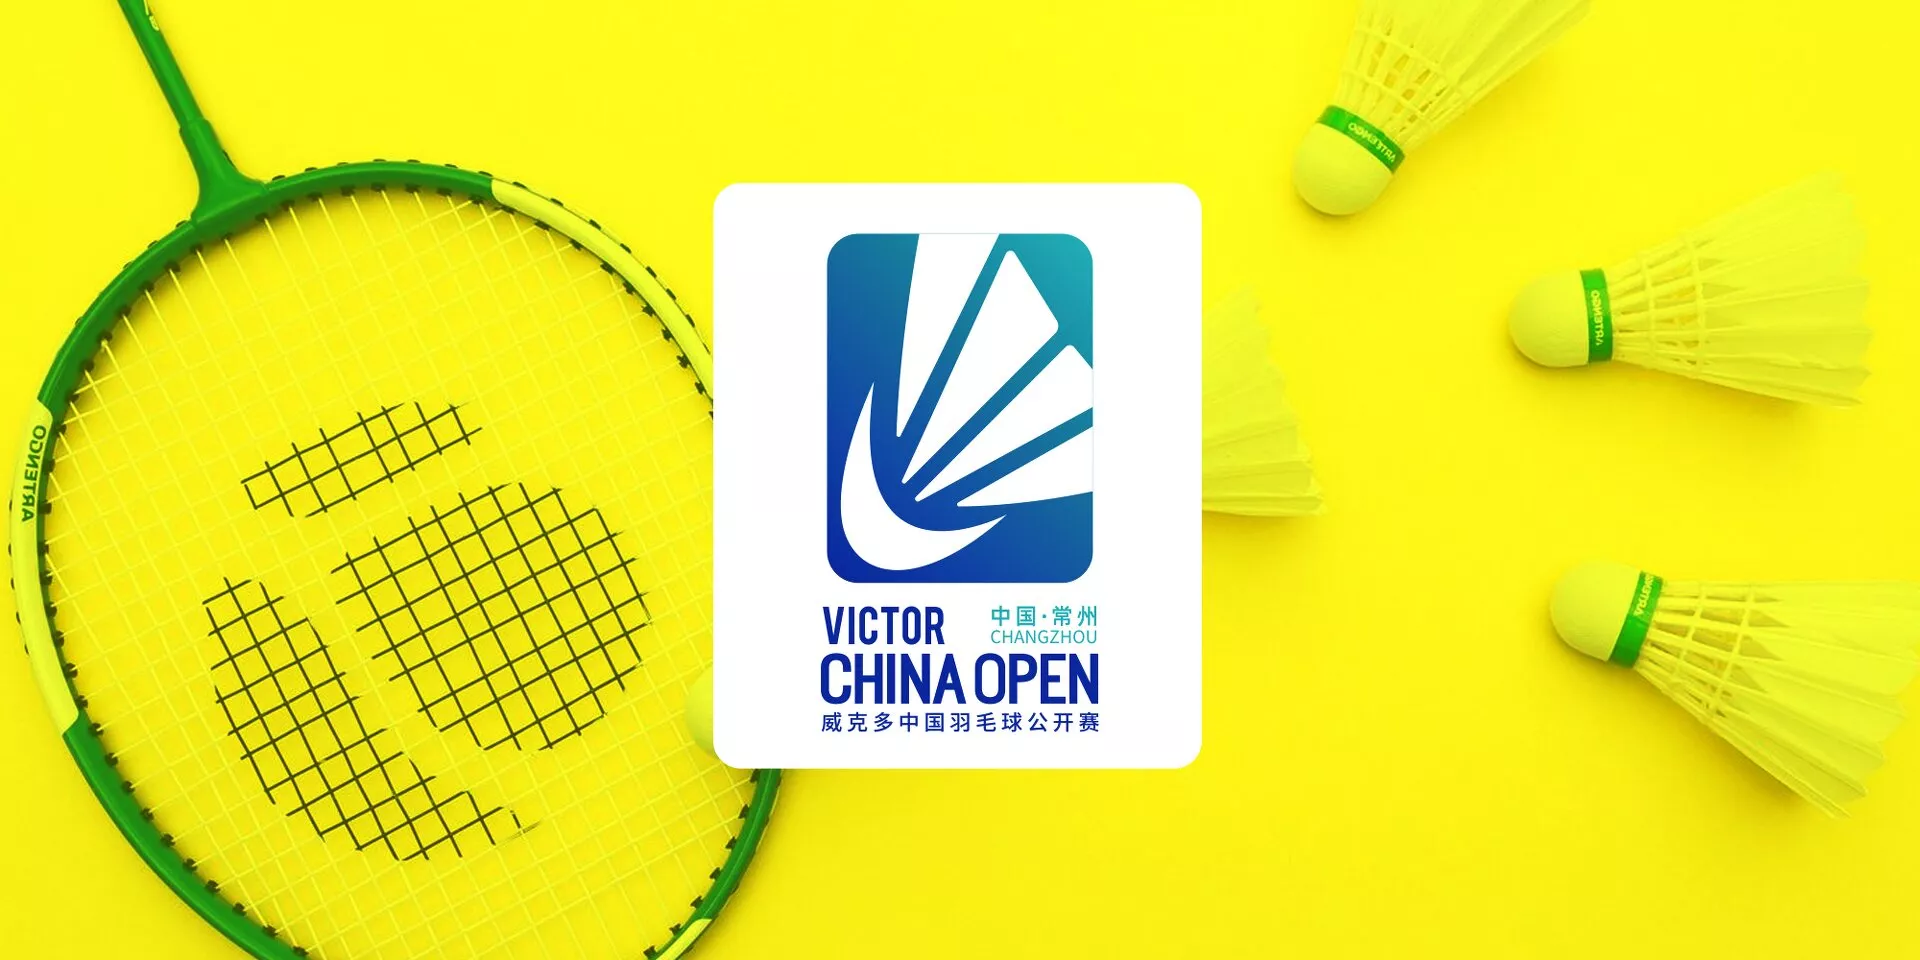 Where and how to watch China Open 2023 live in Indonesia?